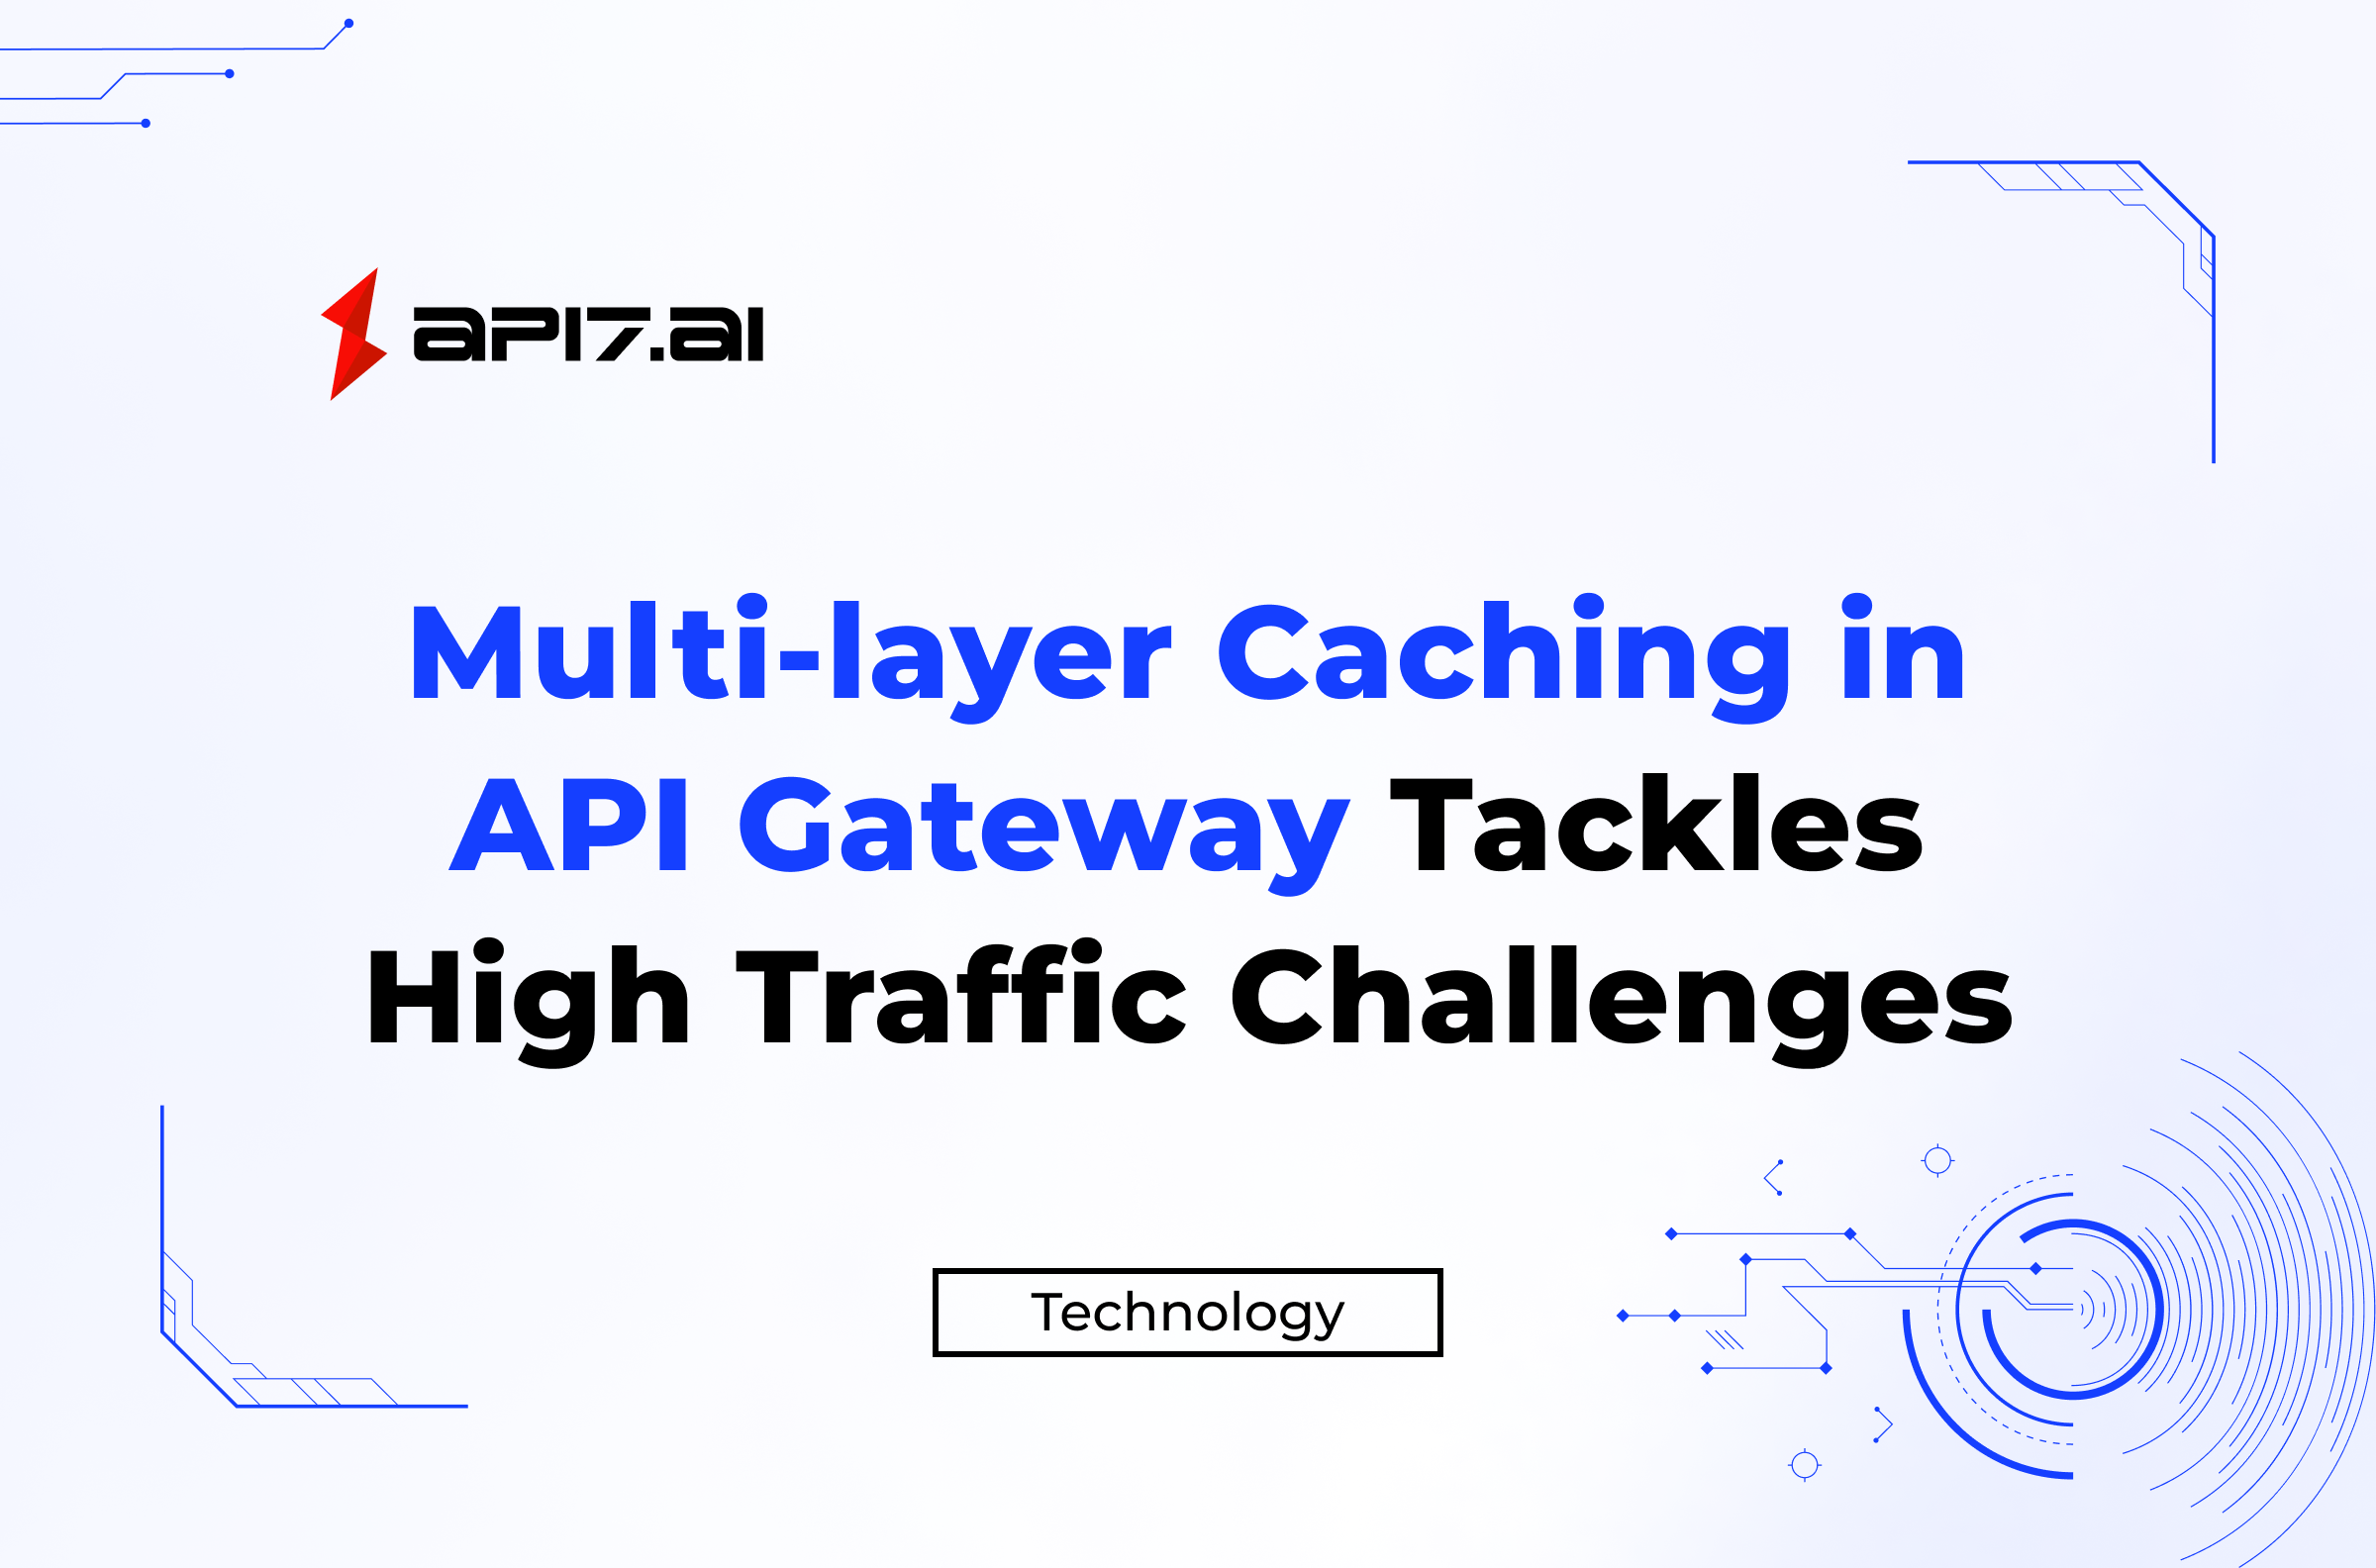 Multi-layer Caching in API Gateway Tackles High Traffic Challenges